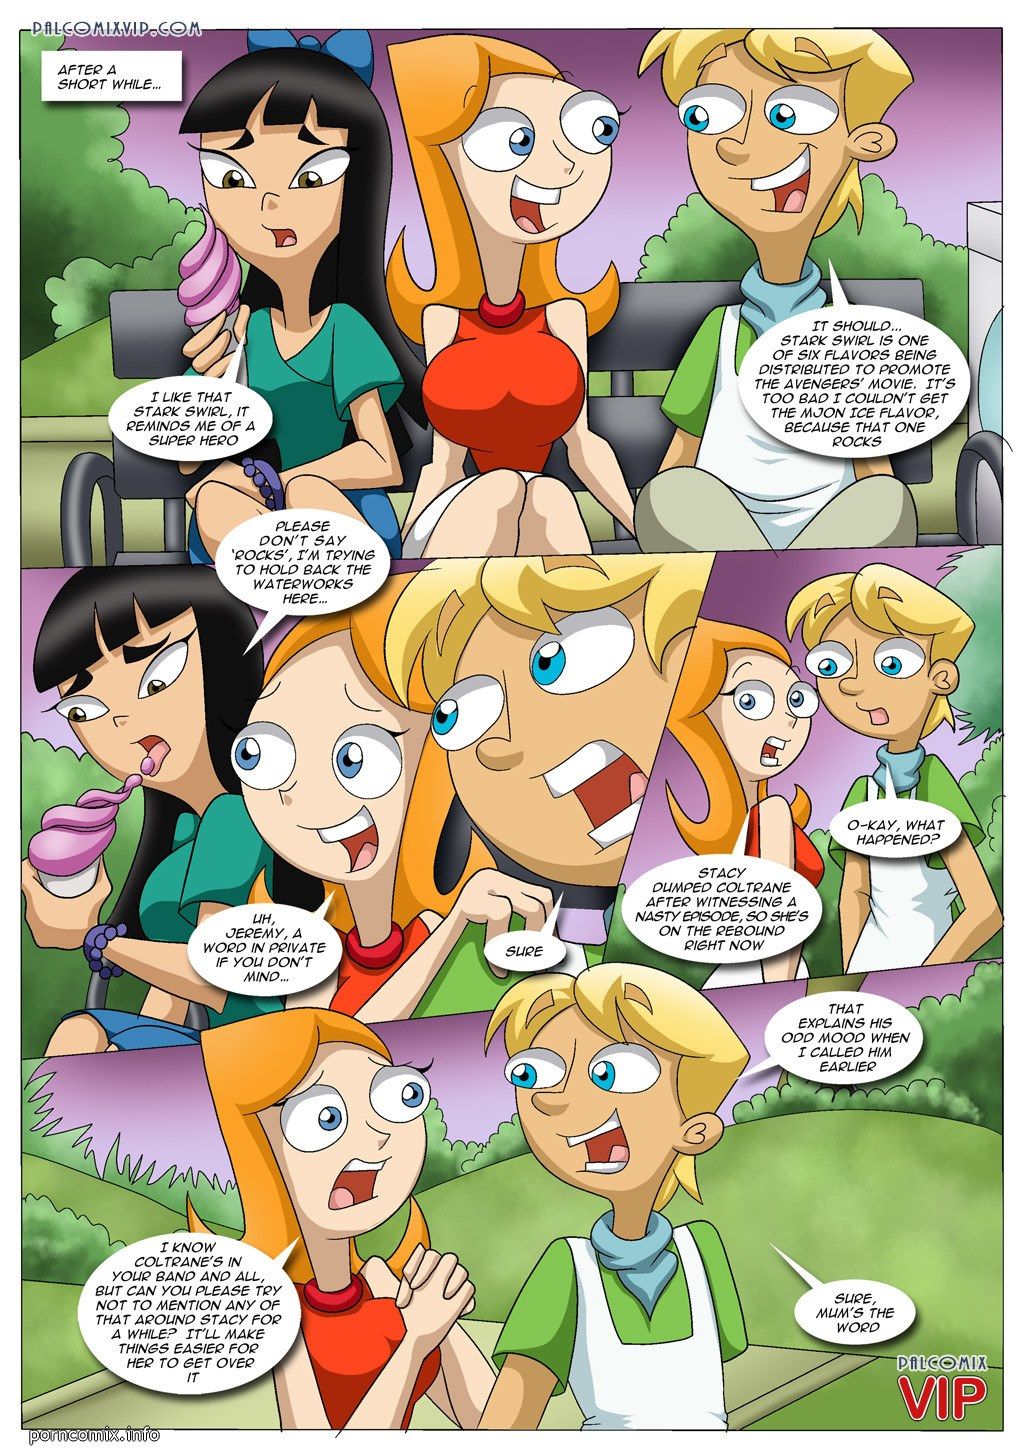 Pal Comix - Phineas And Ferb - Helping Out a Friend page 3